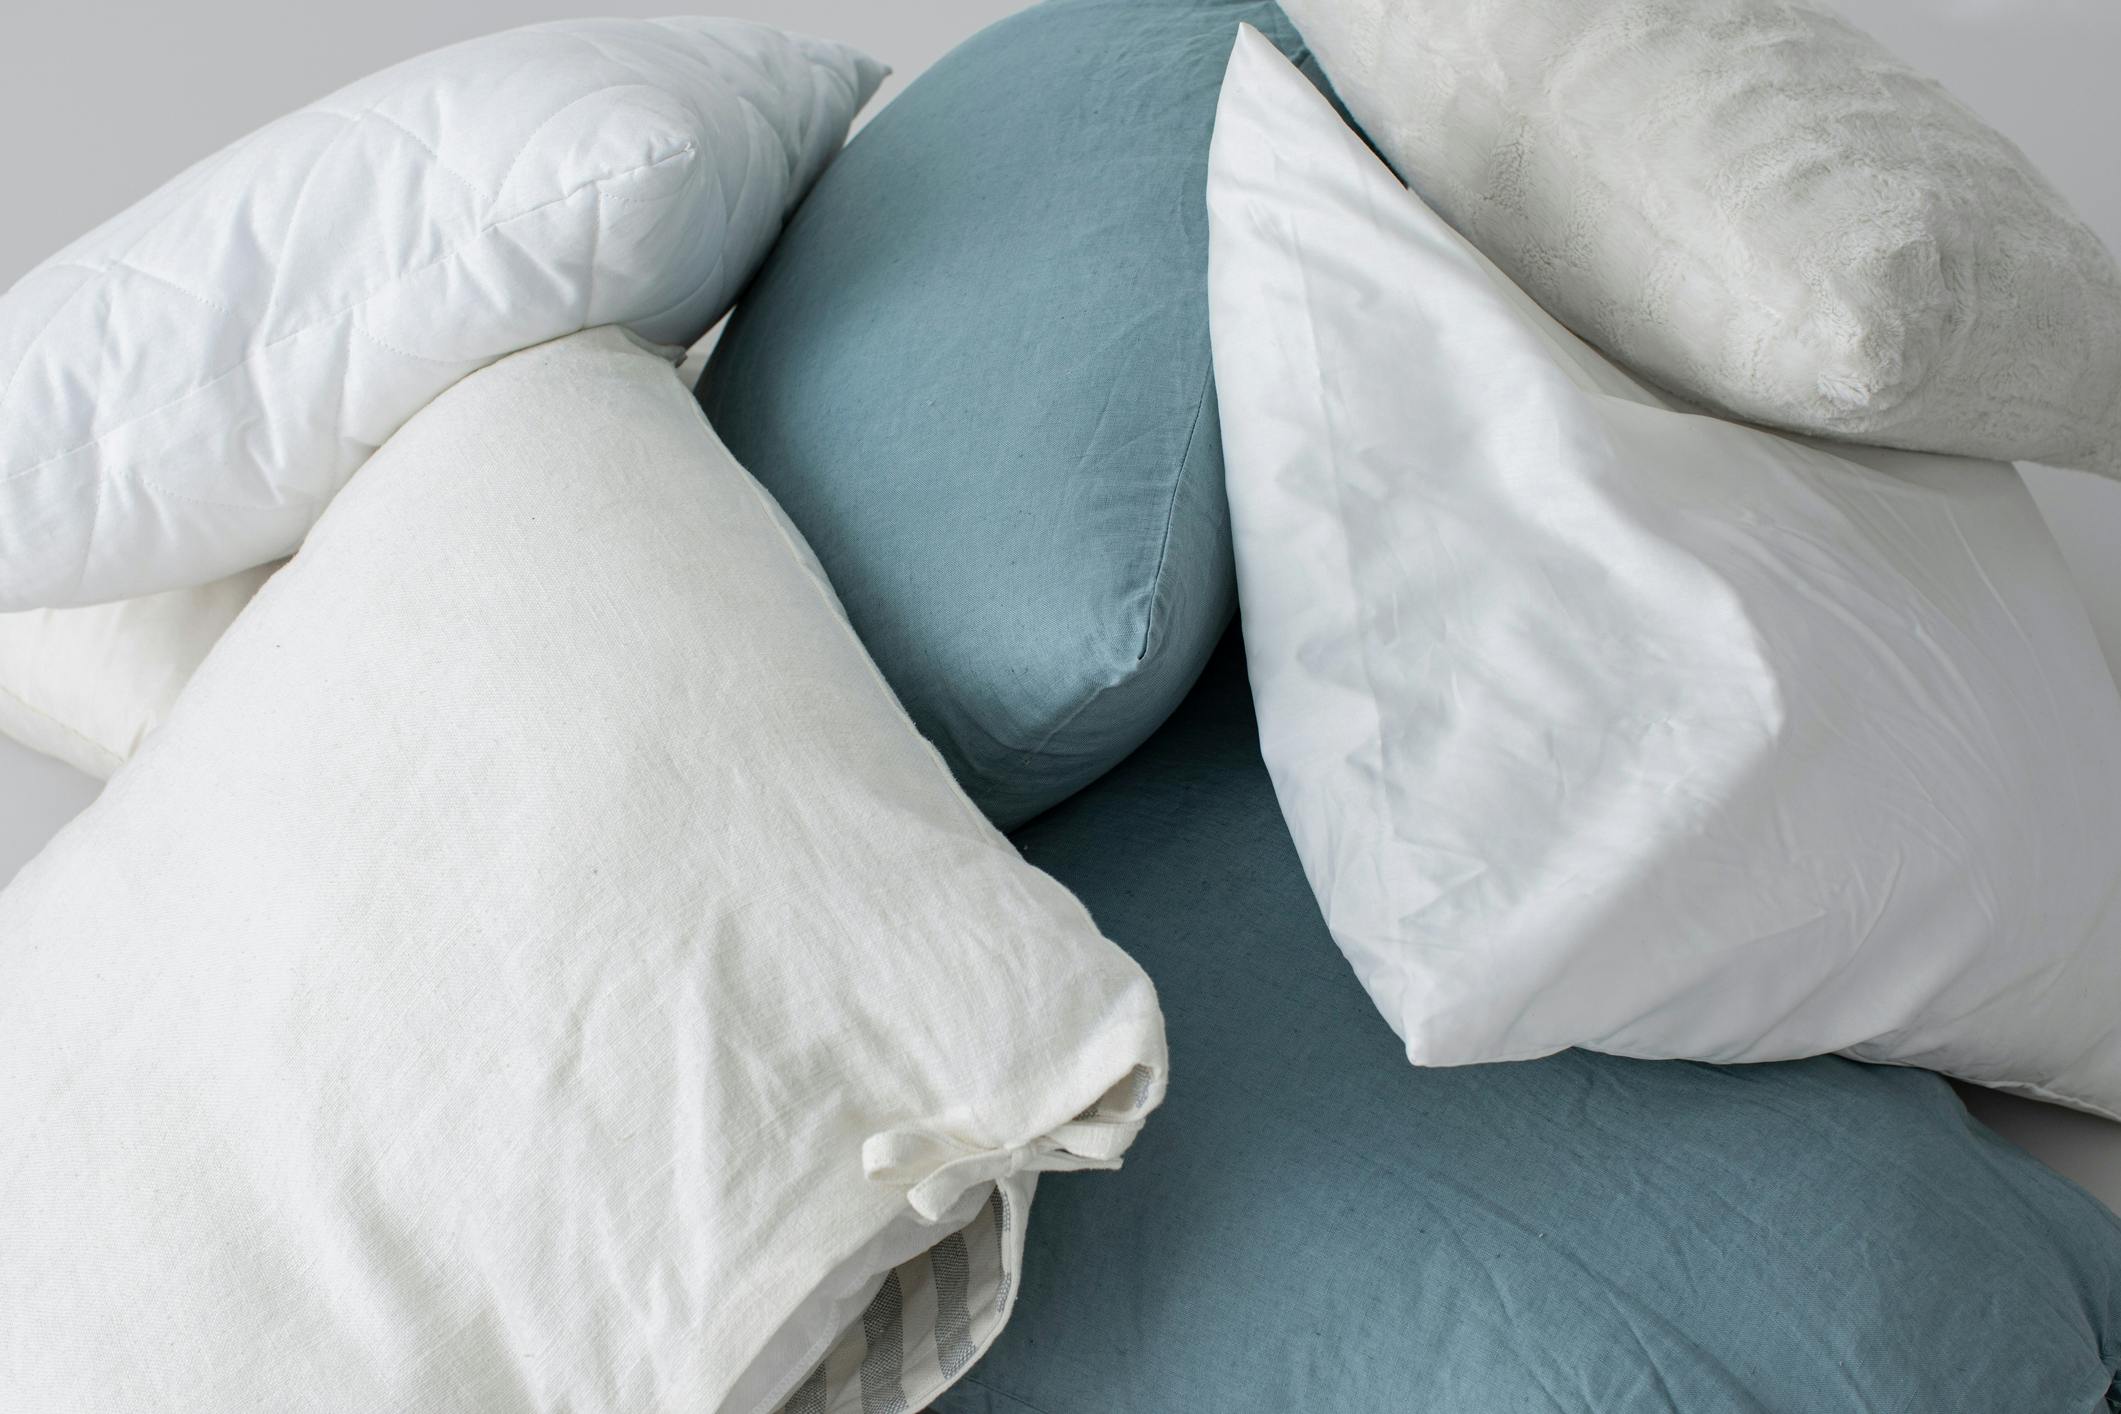 Pillows blue and white